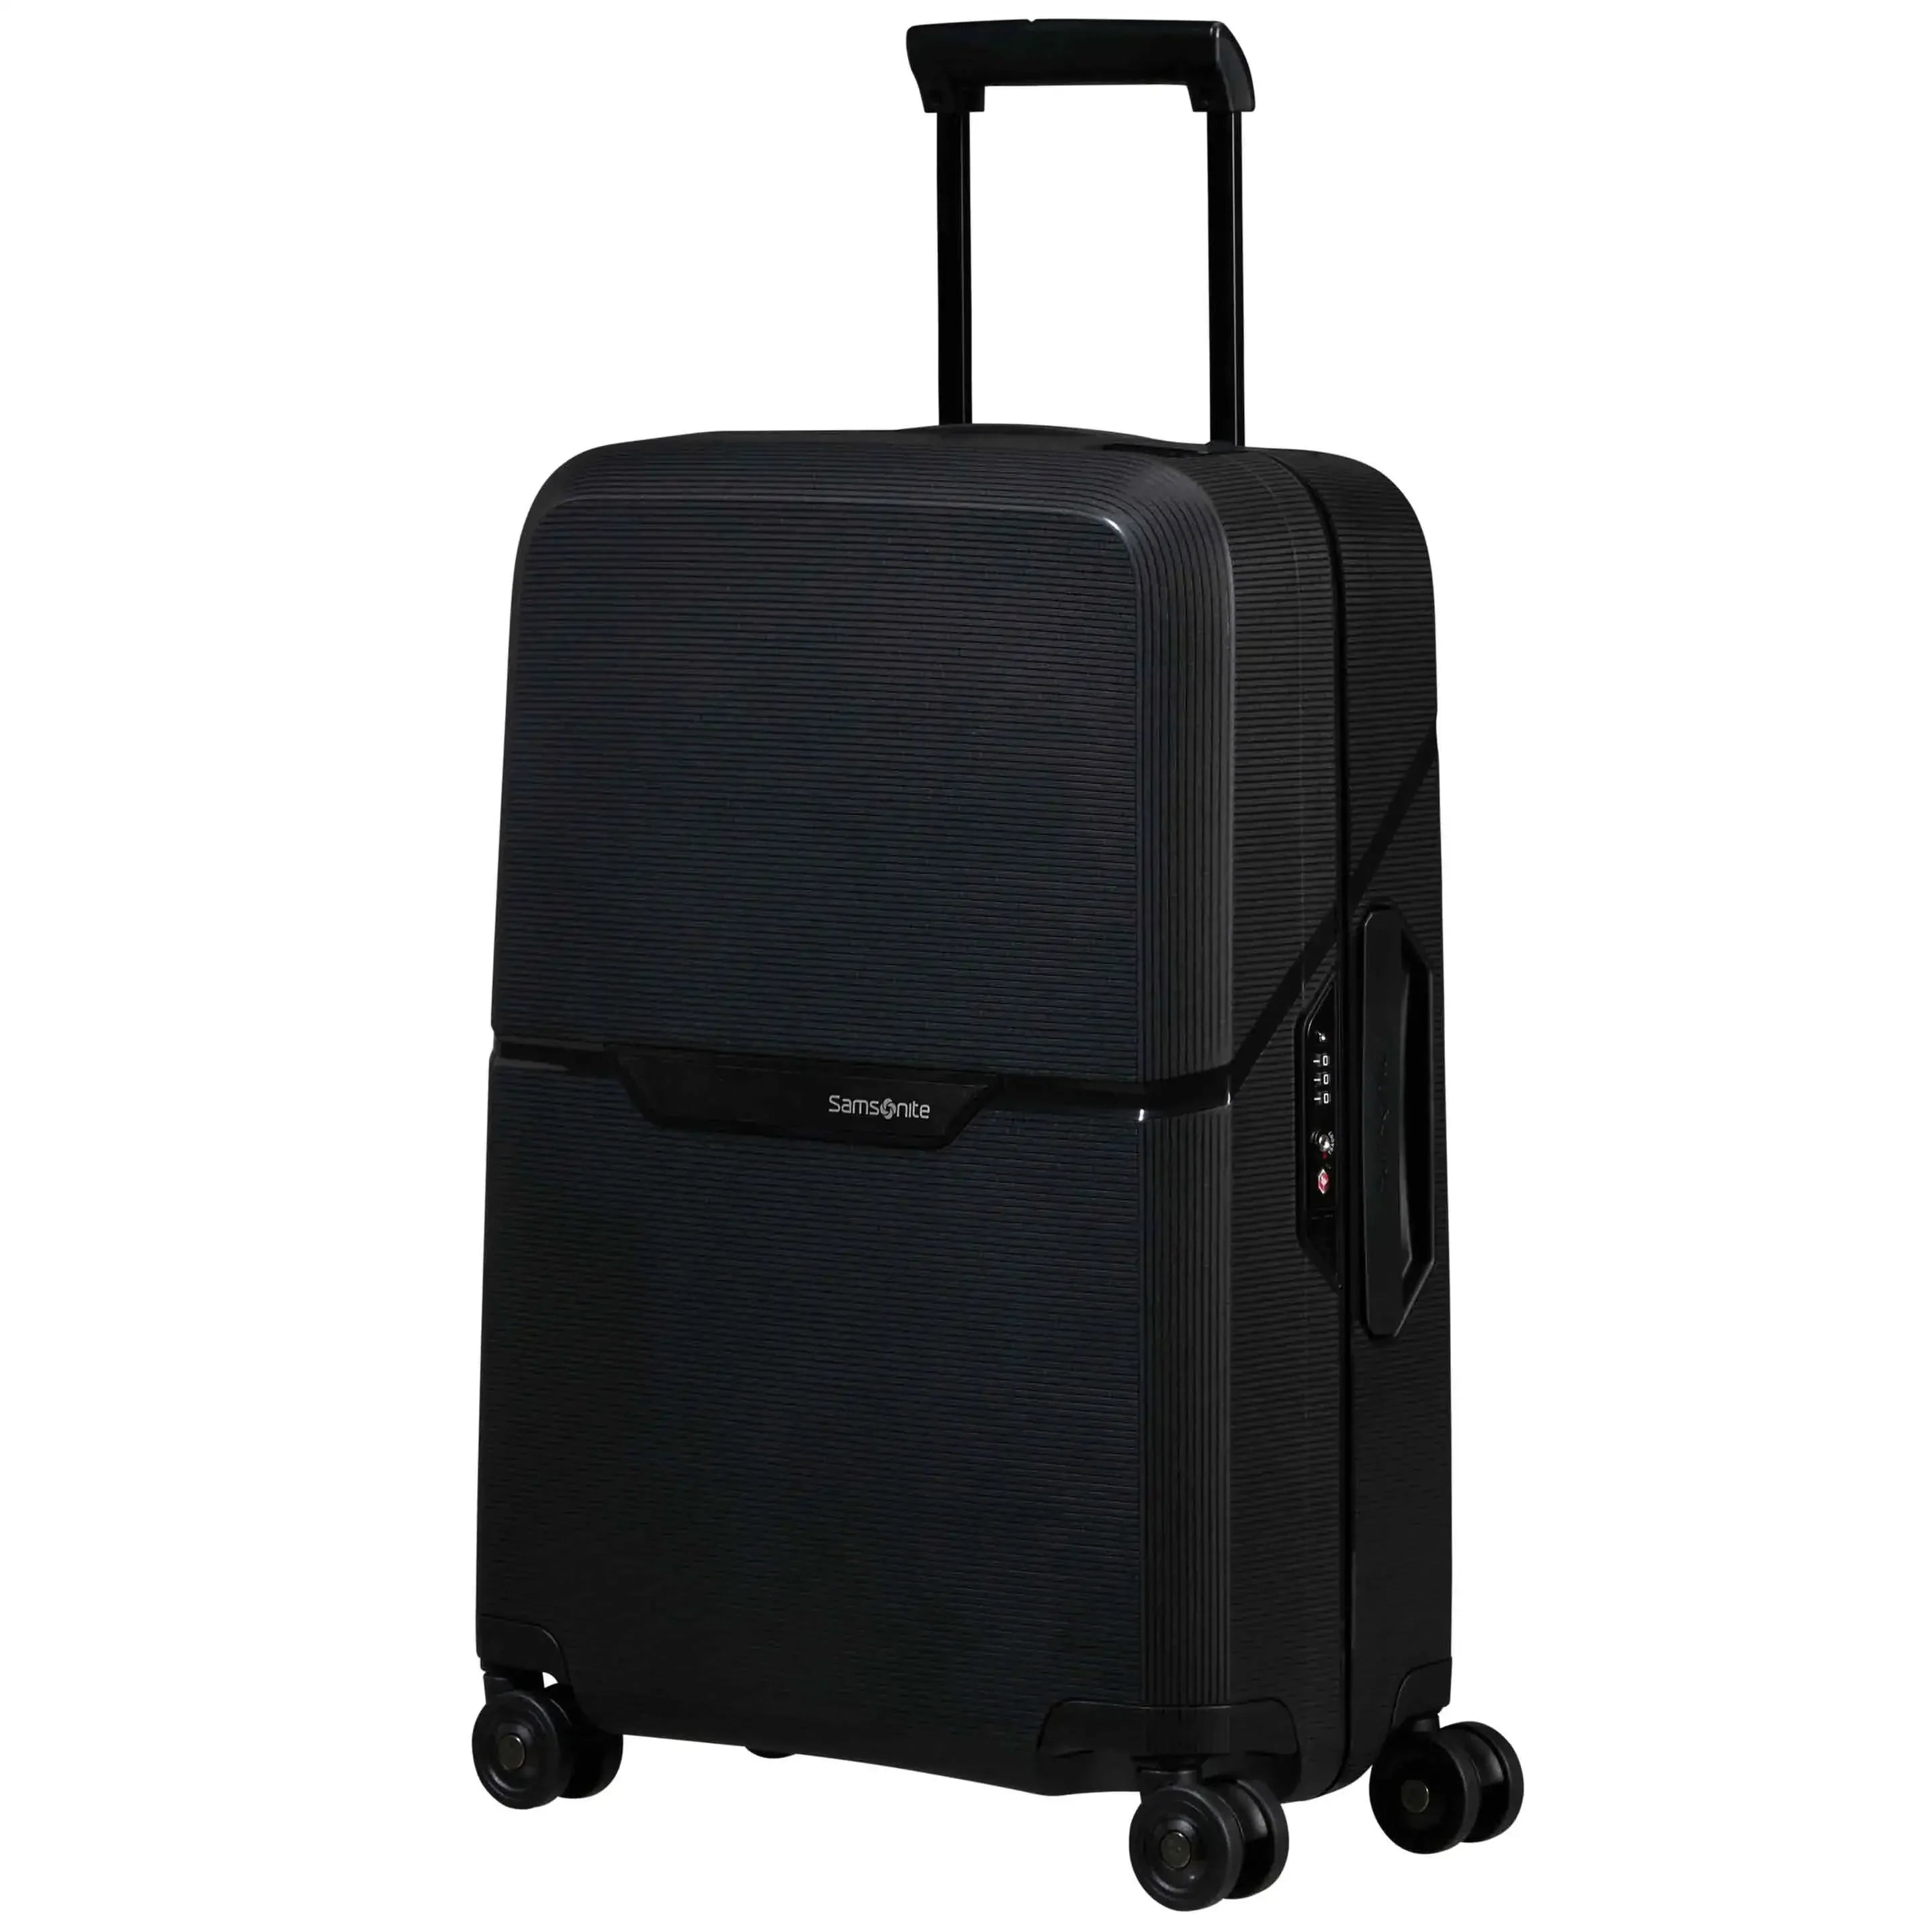 The right luggage Samsonite from